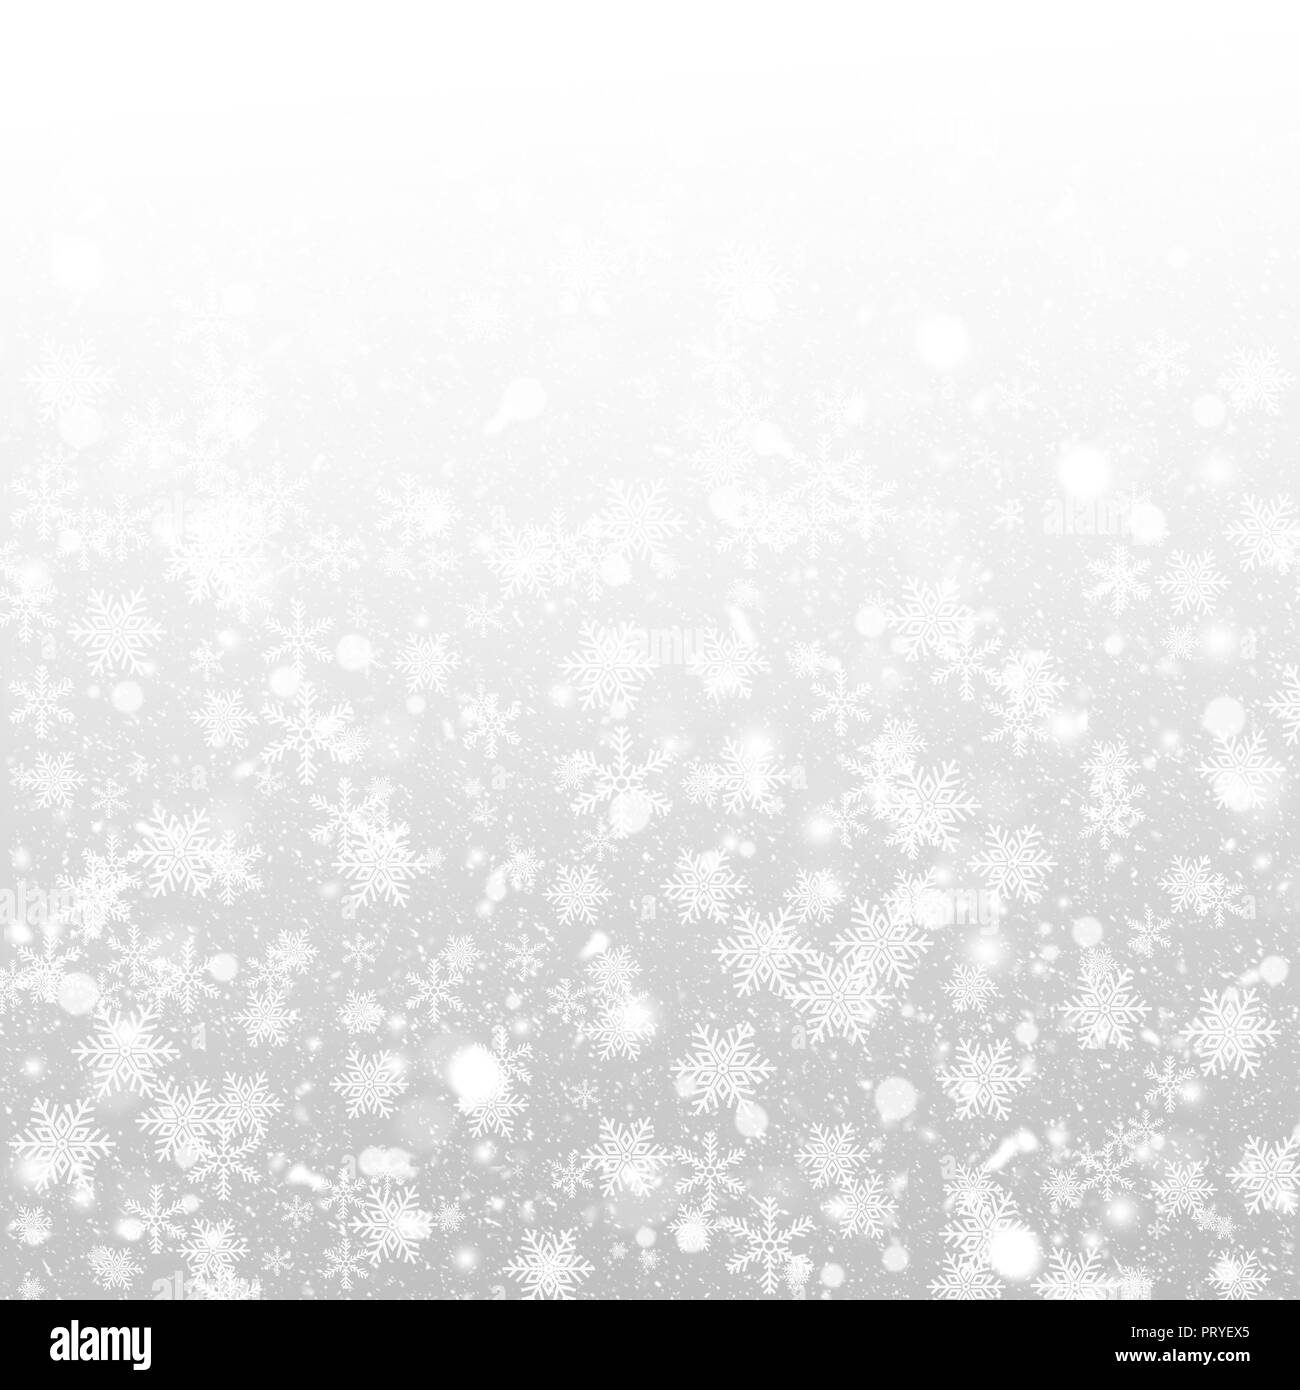 Abstract Snowflakes Holiday Background Stock Photo